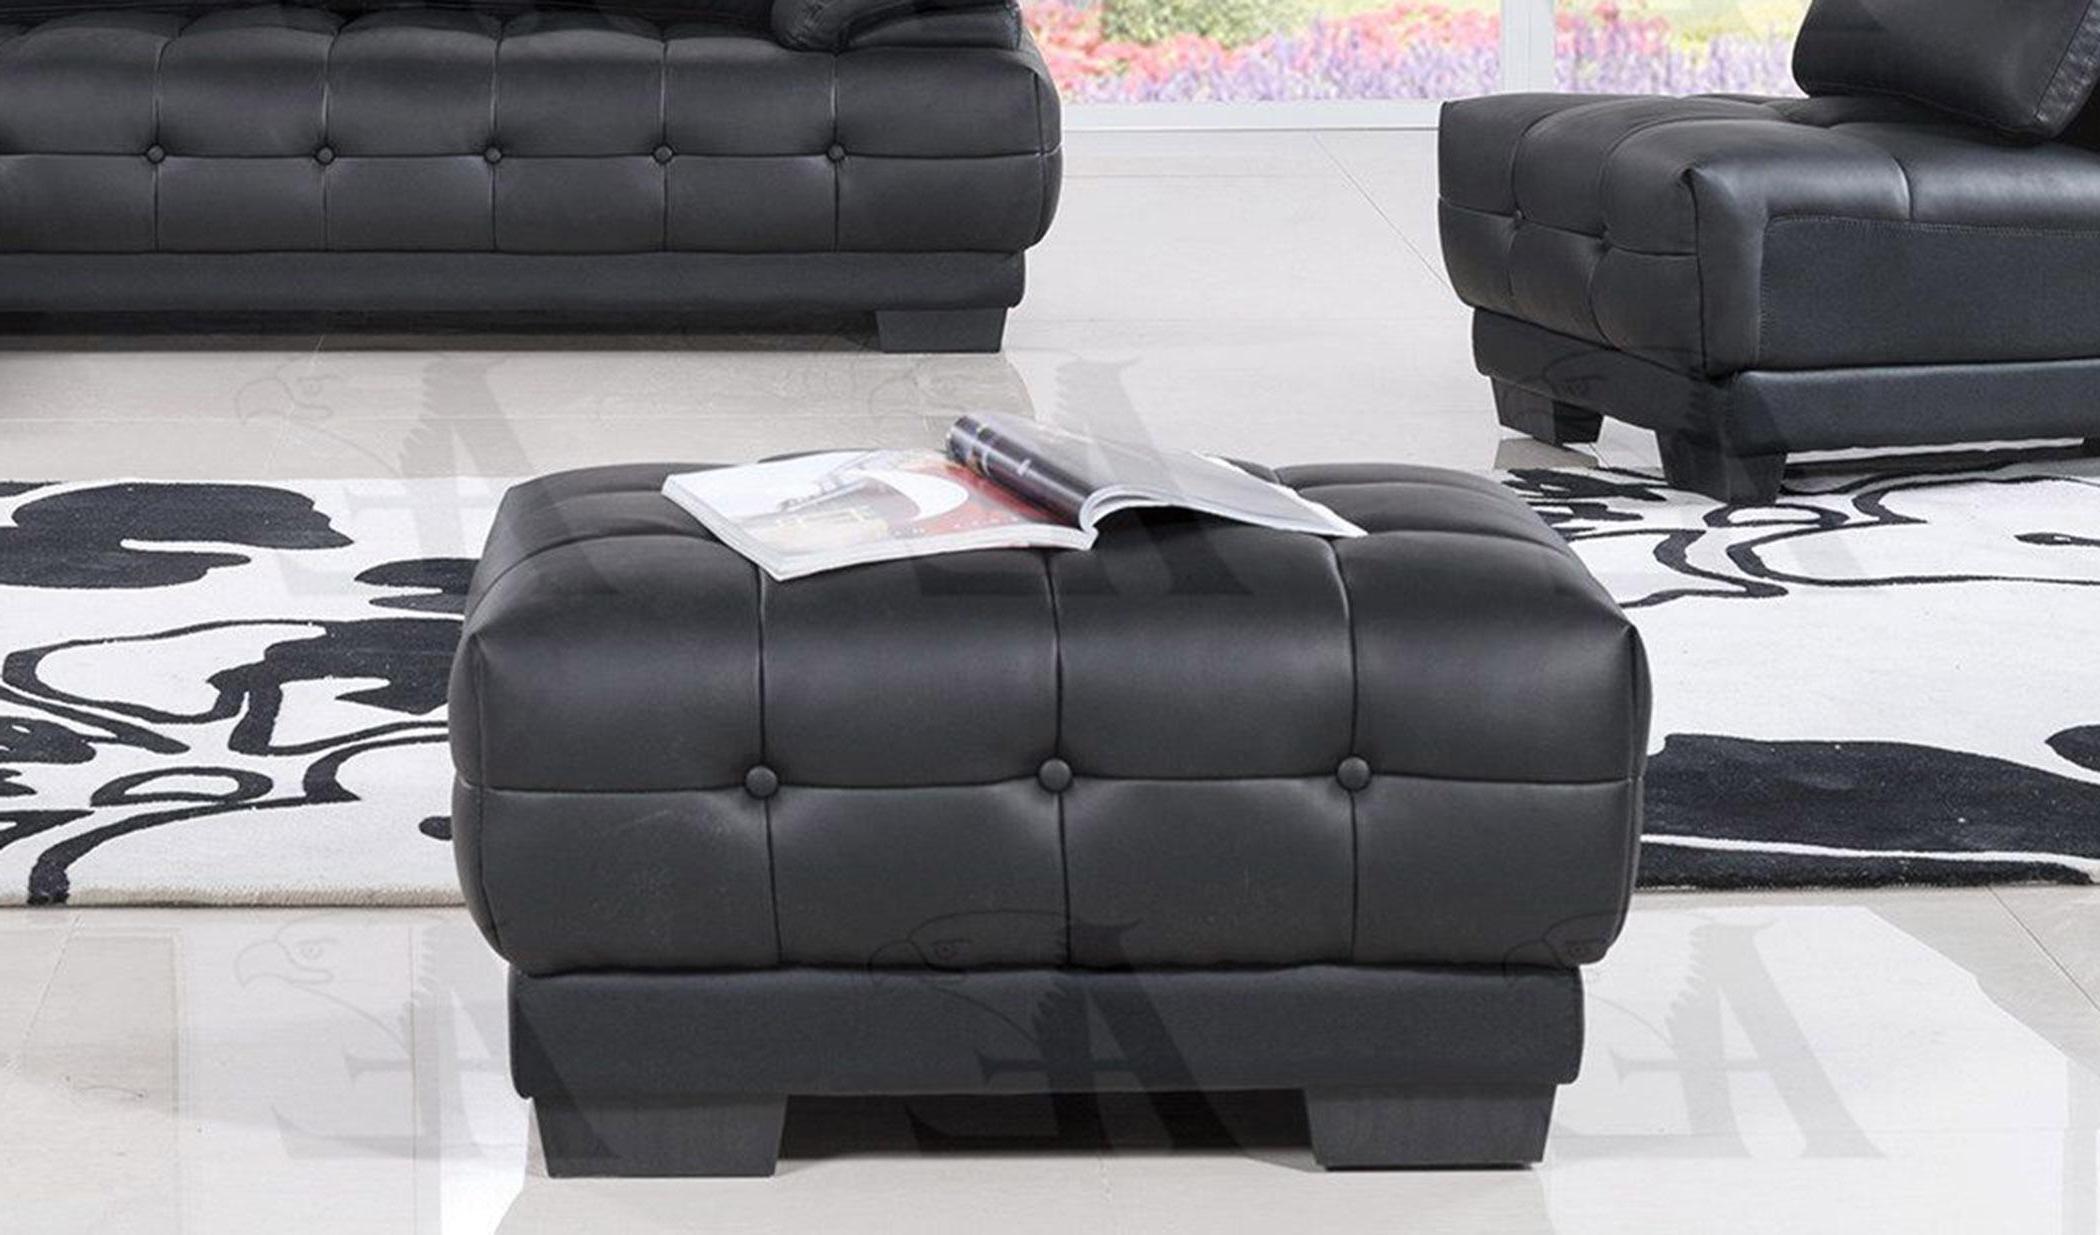 

                    
American Eagle Furniture AE-L296-BK Sofa Chaise Chair and Ottoman Set Black Bonded Leather Purchase 
